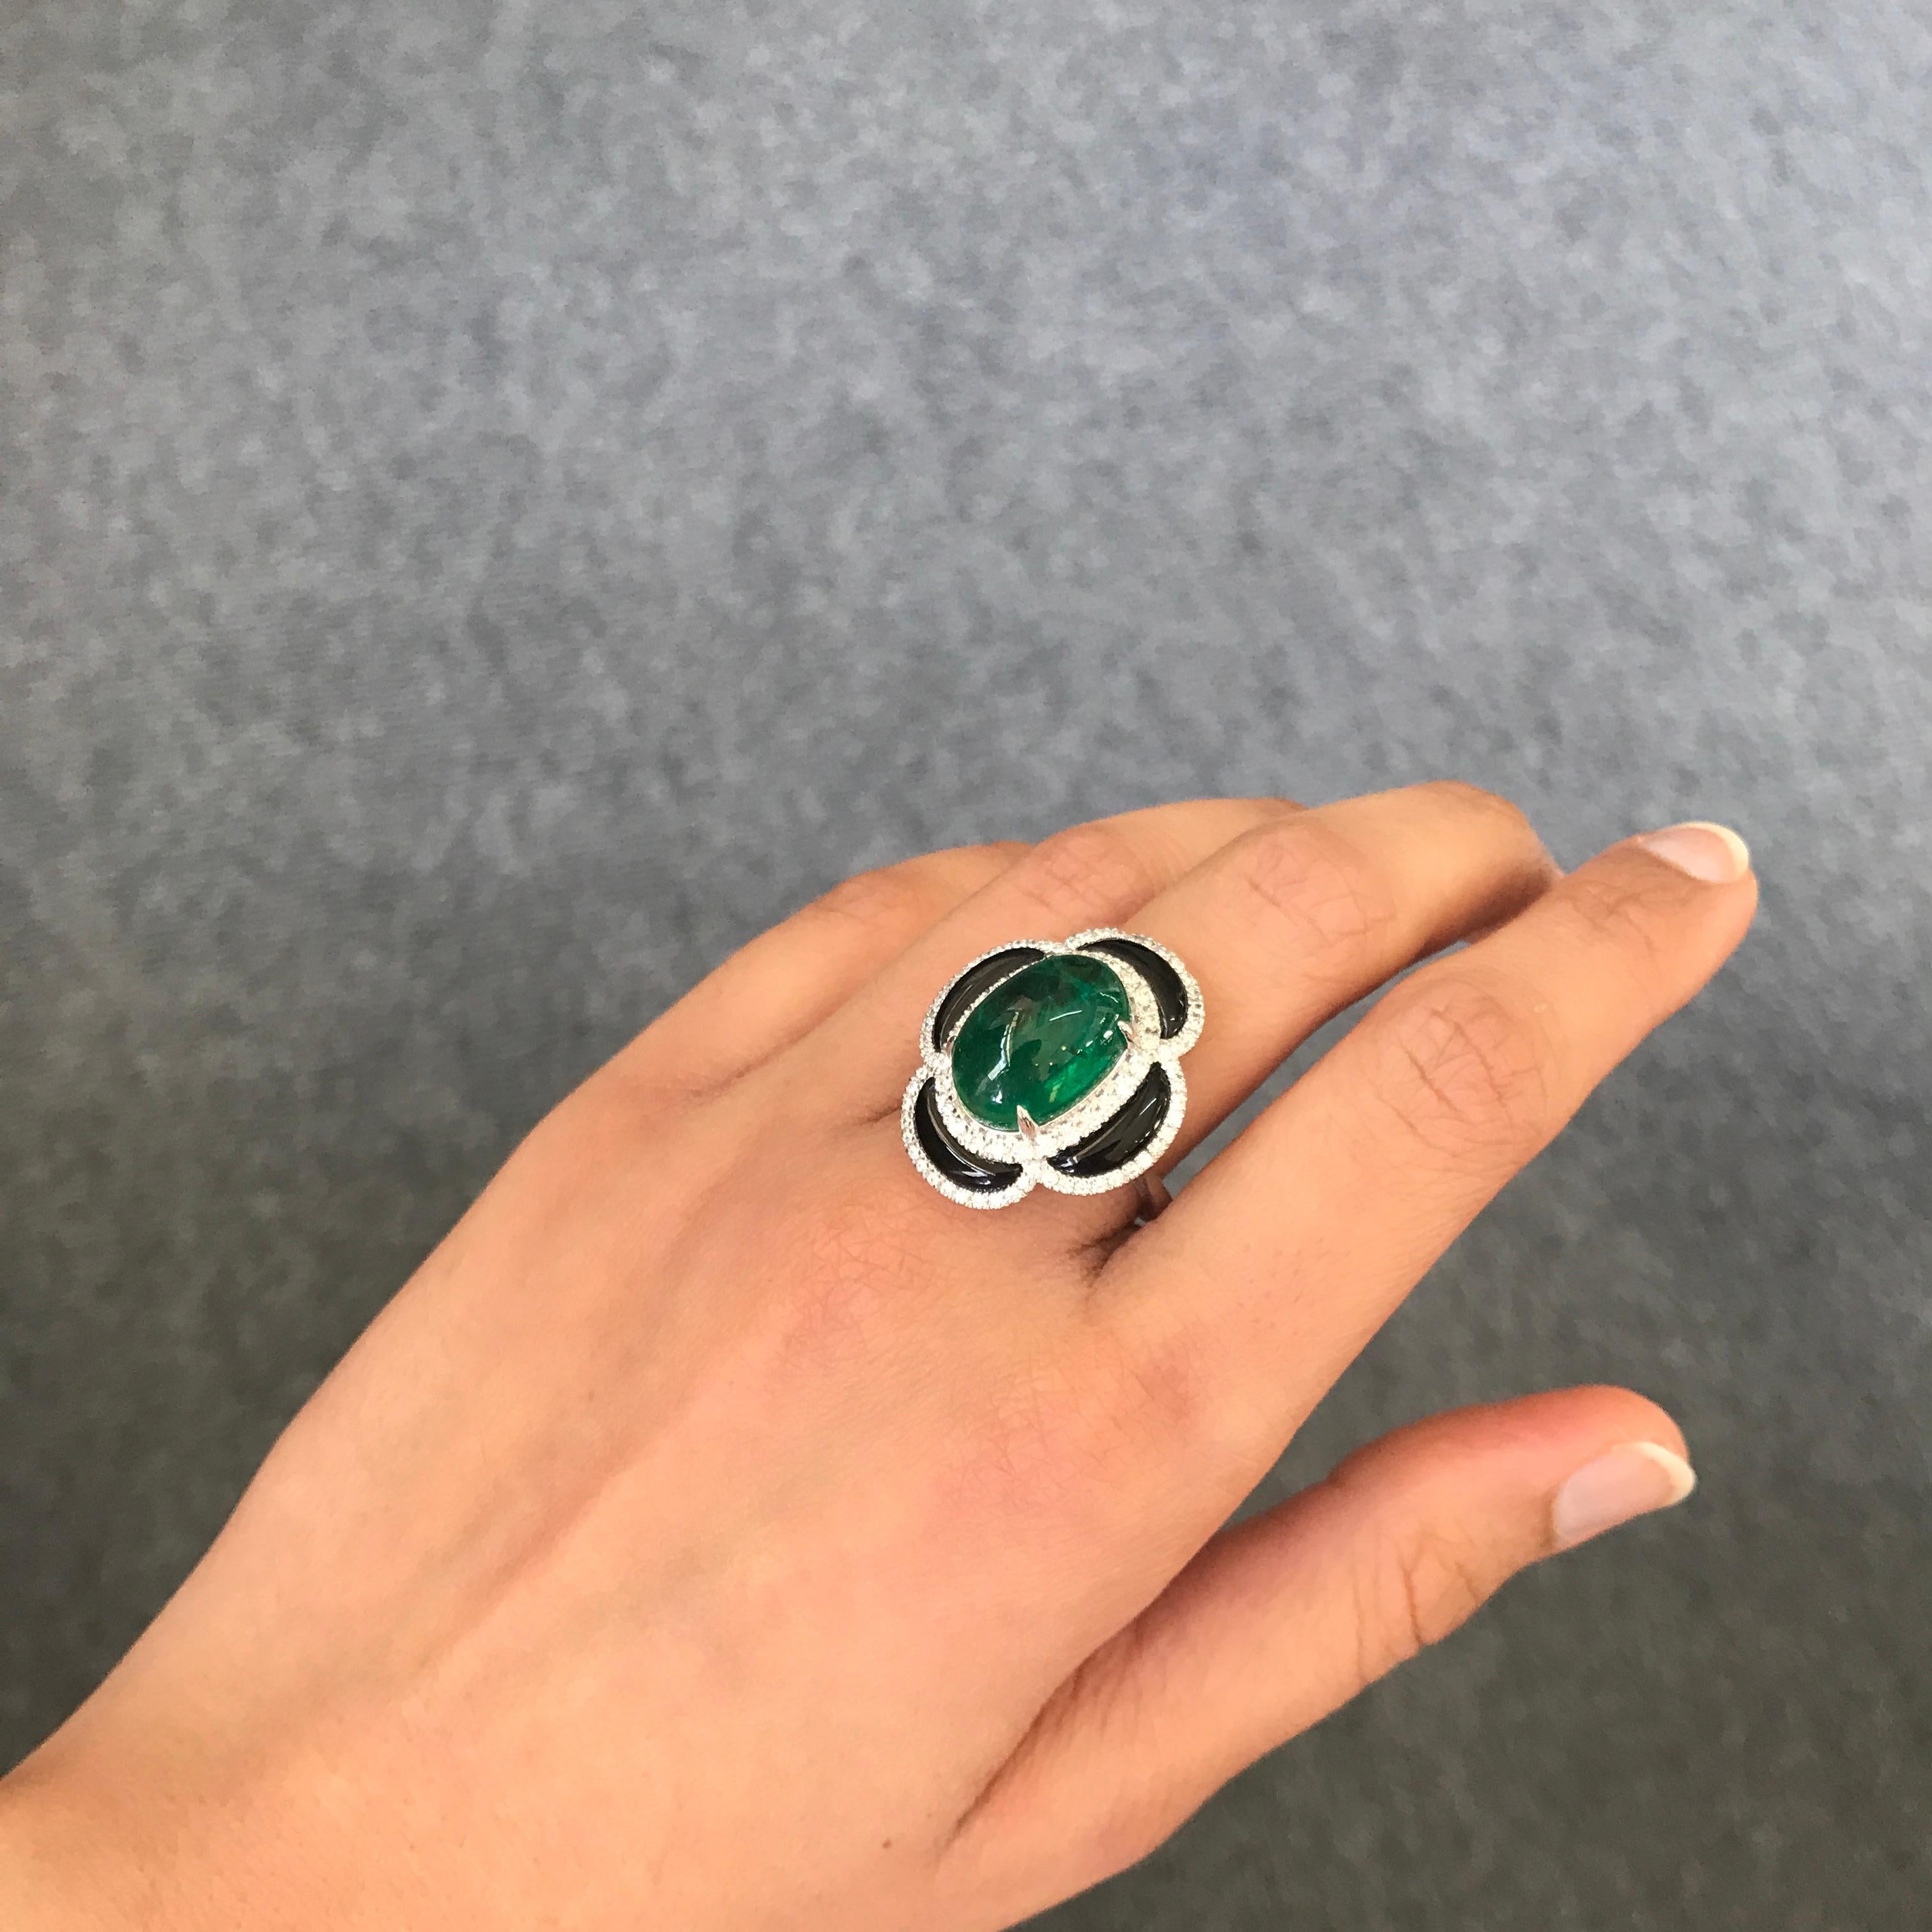 Oval Cut 9.40 Carat Emerald Cabochon, Black Onyx and Diamond Cocktail Ring